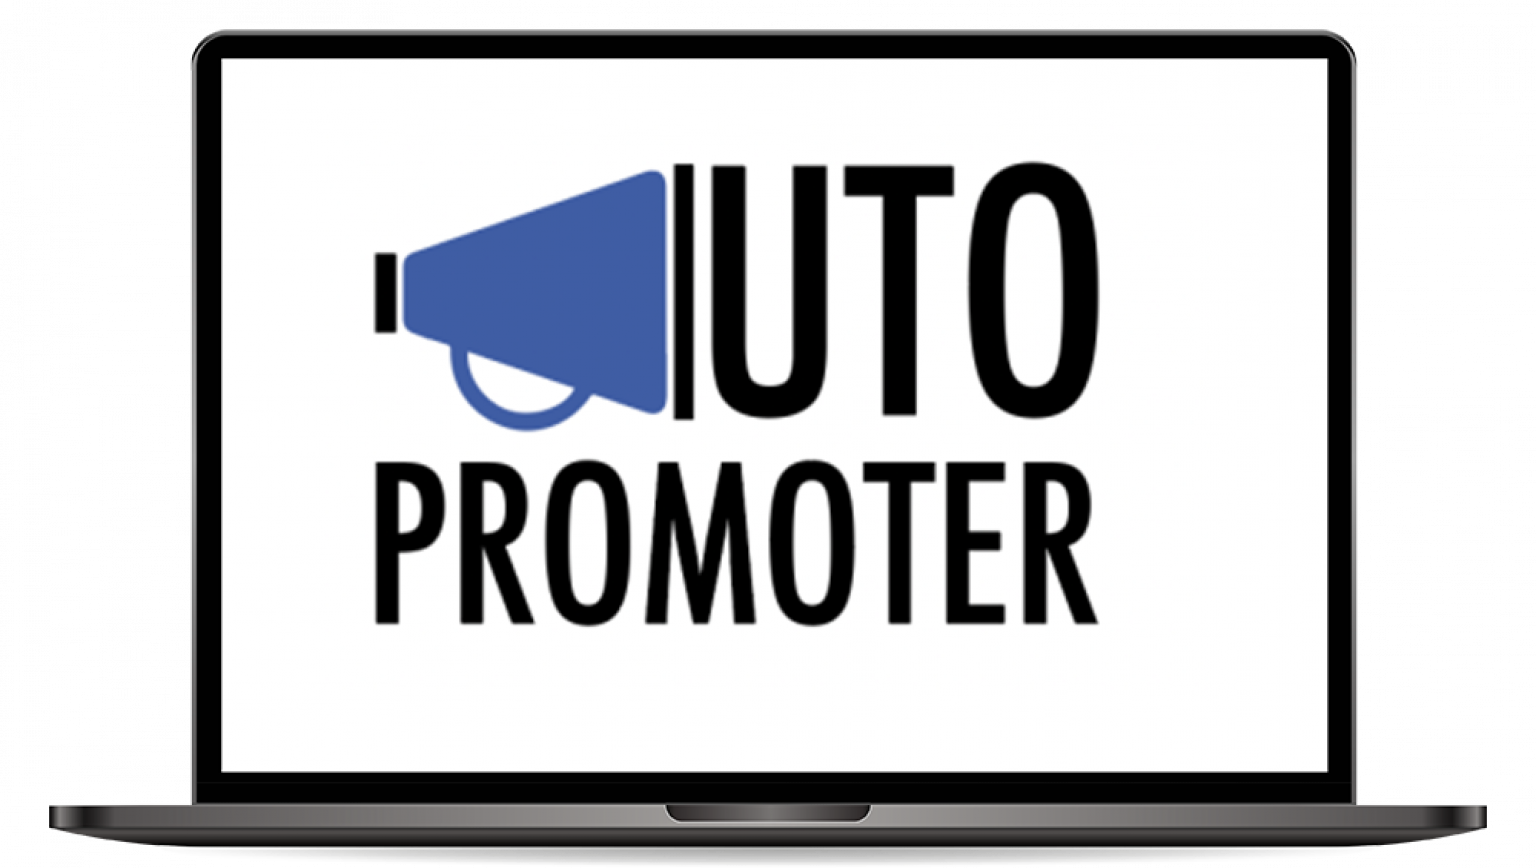 Auto Promoter Review